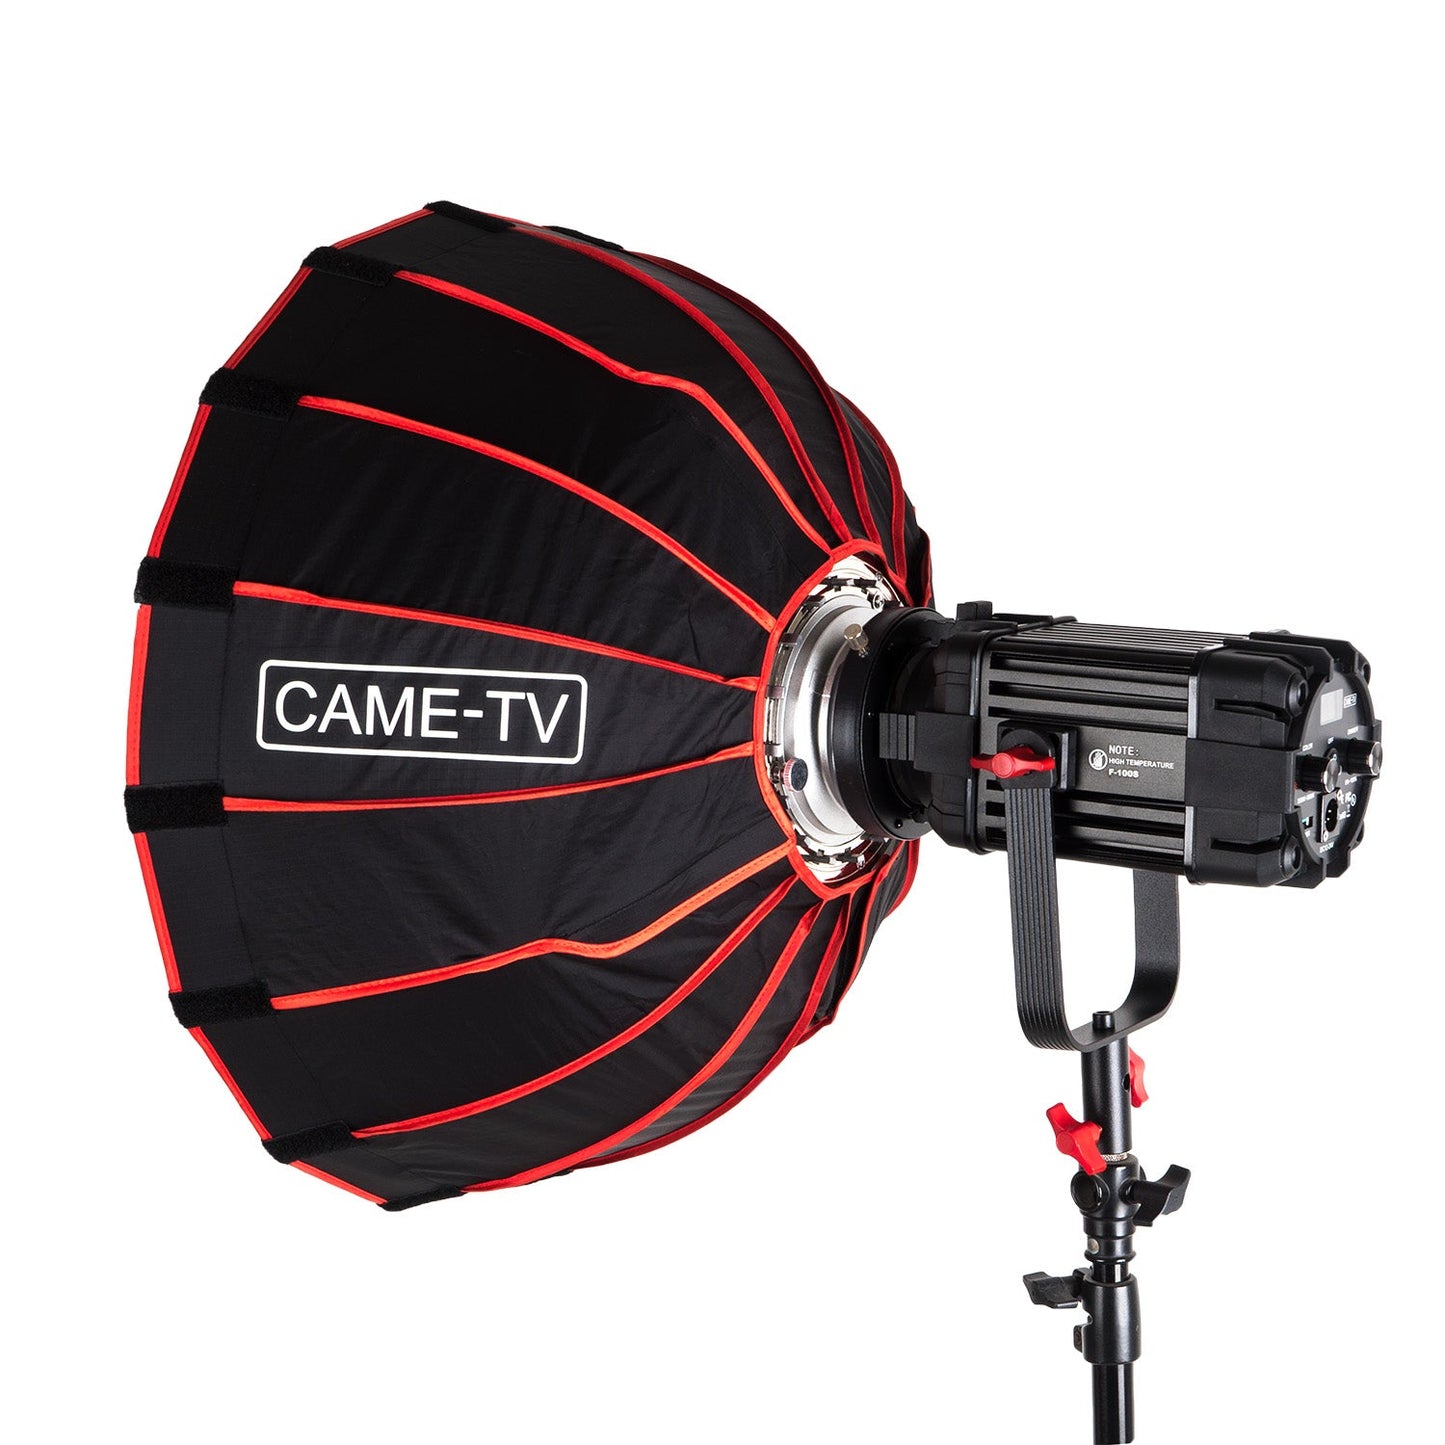 CAME-TV Boltzen MKII 100w Travel Kits Fresnel Fanless Focusable LED Bi-Color B-100S 16000 Lux@1m - CAME-TV